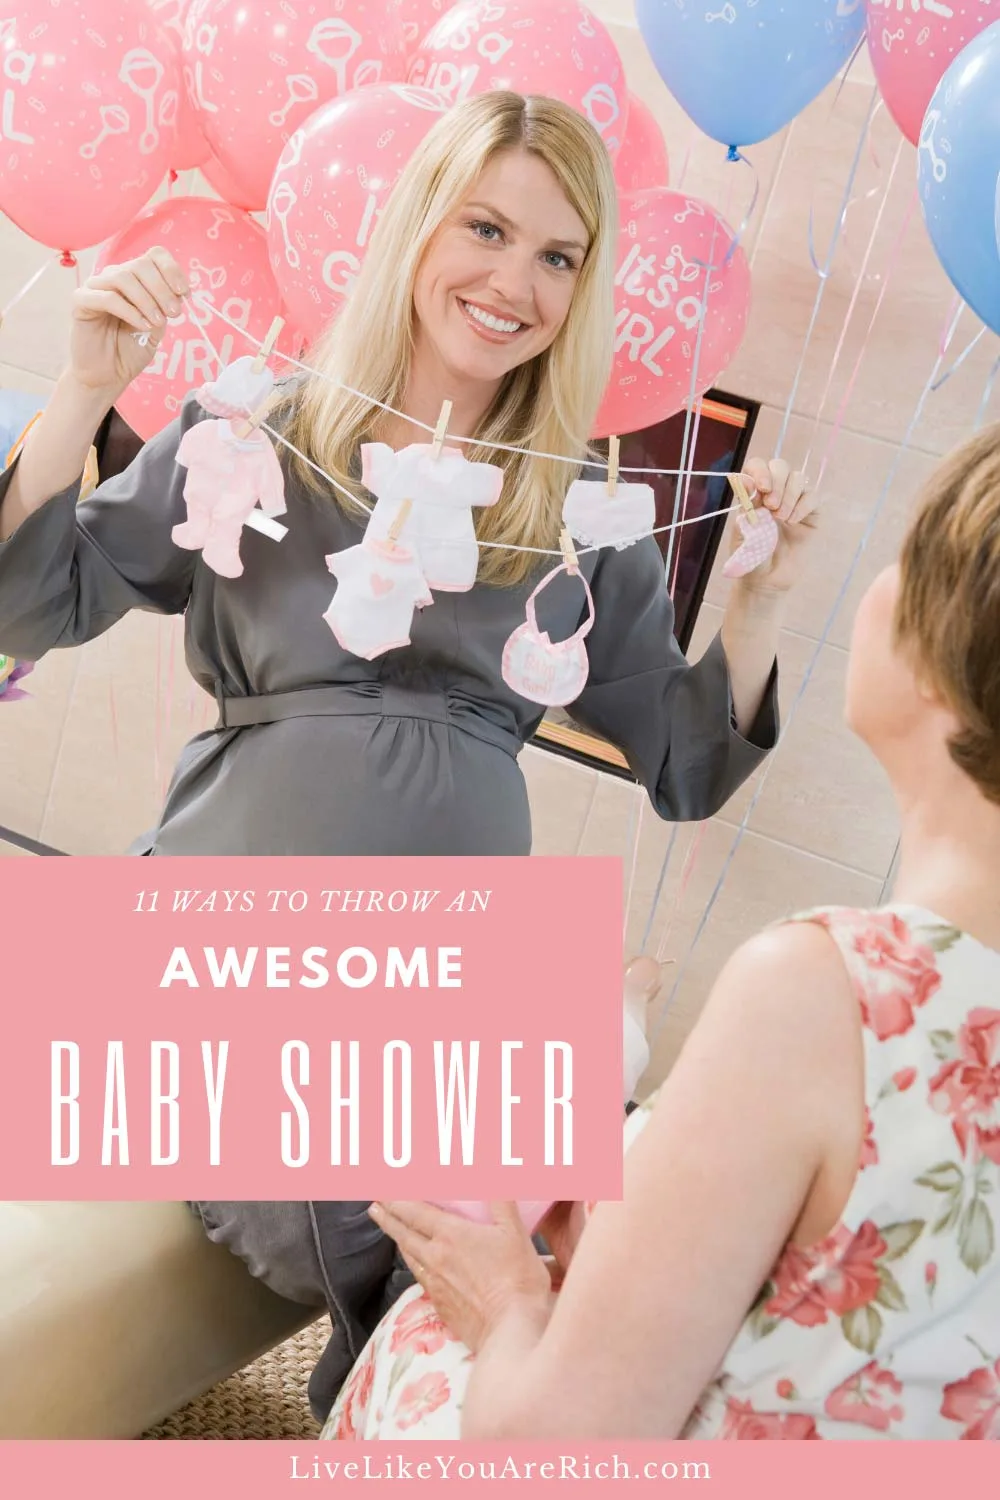 Most baby showers cost $300. Some say over $1,000. That's just too expensive if you ask me... here are 11 Ways to throw a baby shower for less than $50.00. Love tips 5 & 9! #babyshower #baby #savemoney